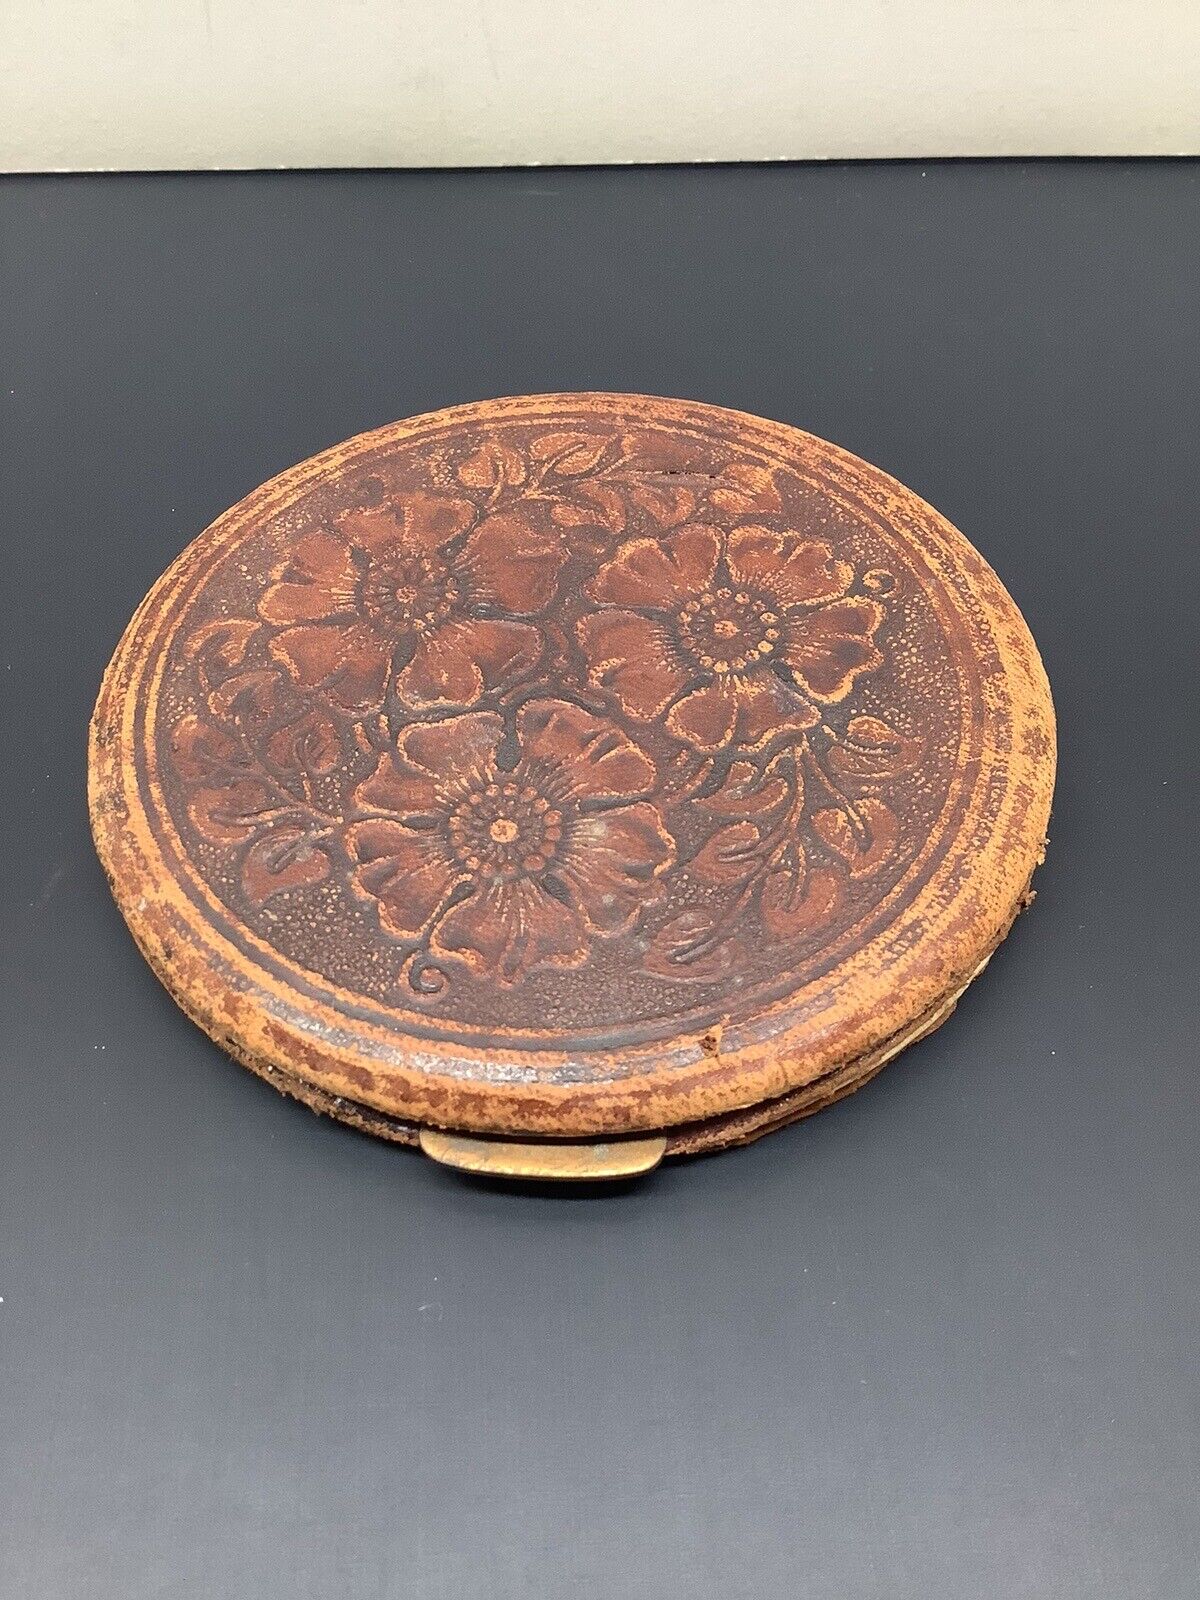 Antique Hand Tooled Leather Wrapped Powder Compact Large 4.5” Floral Design